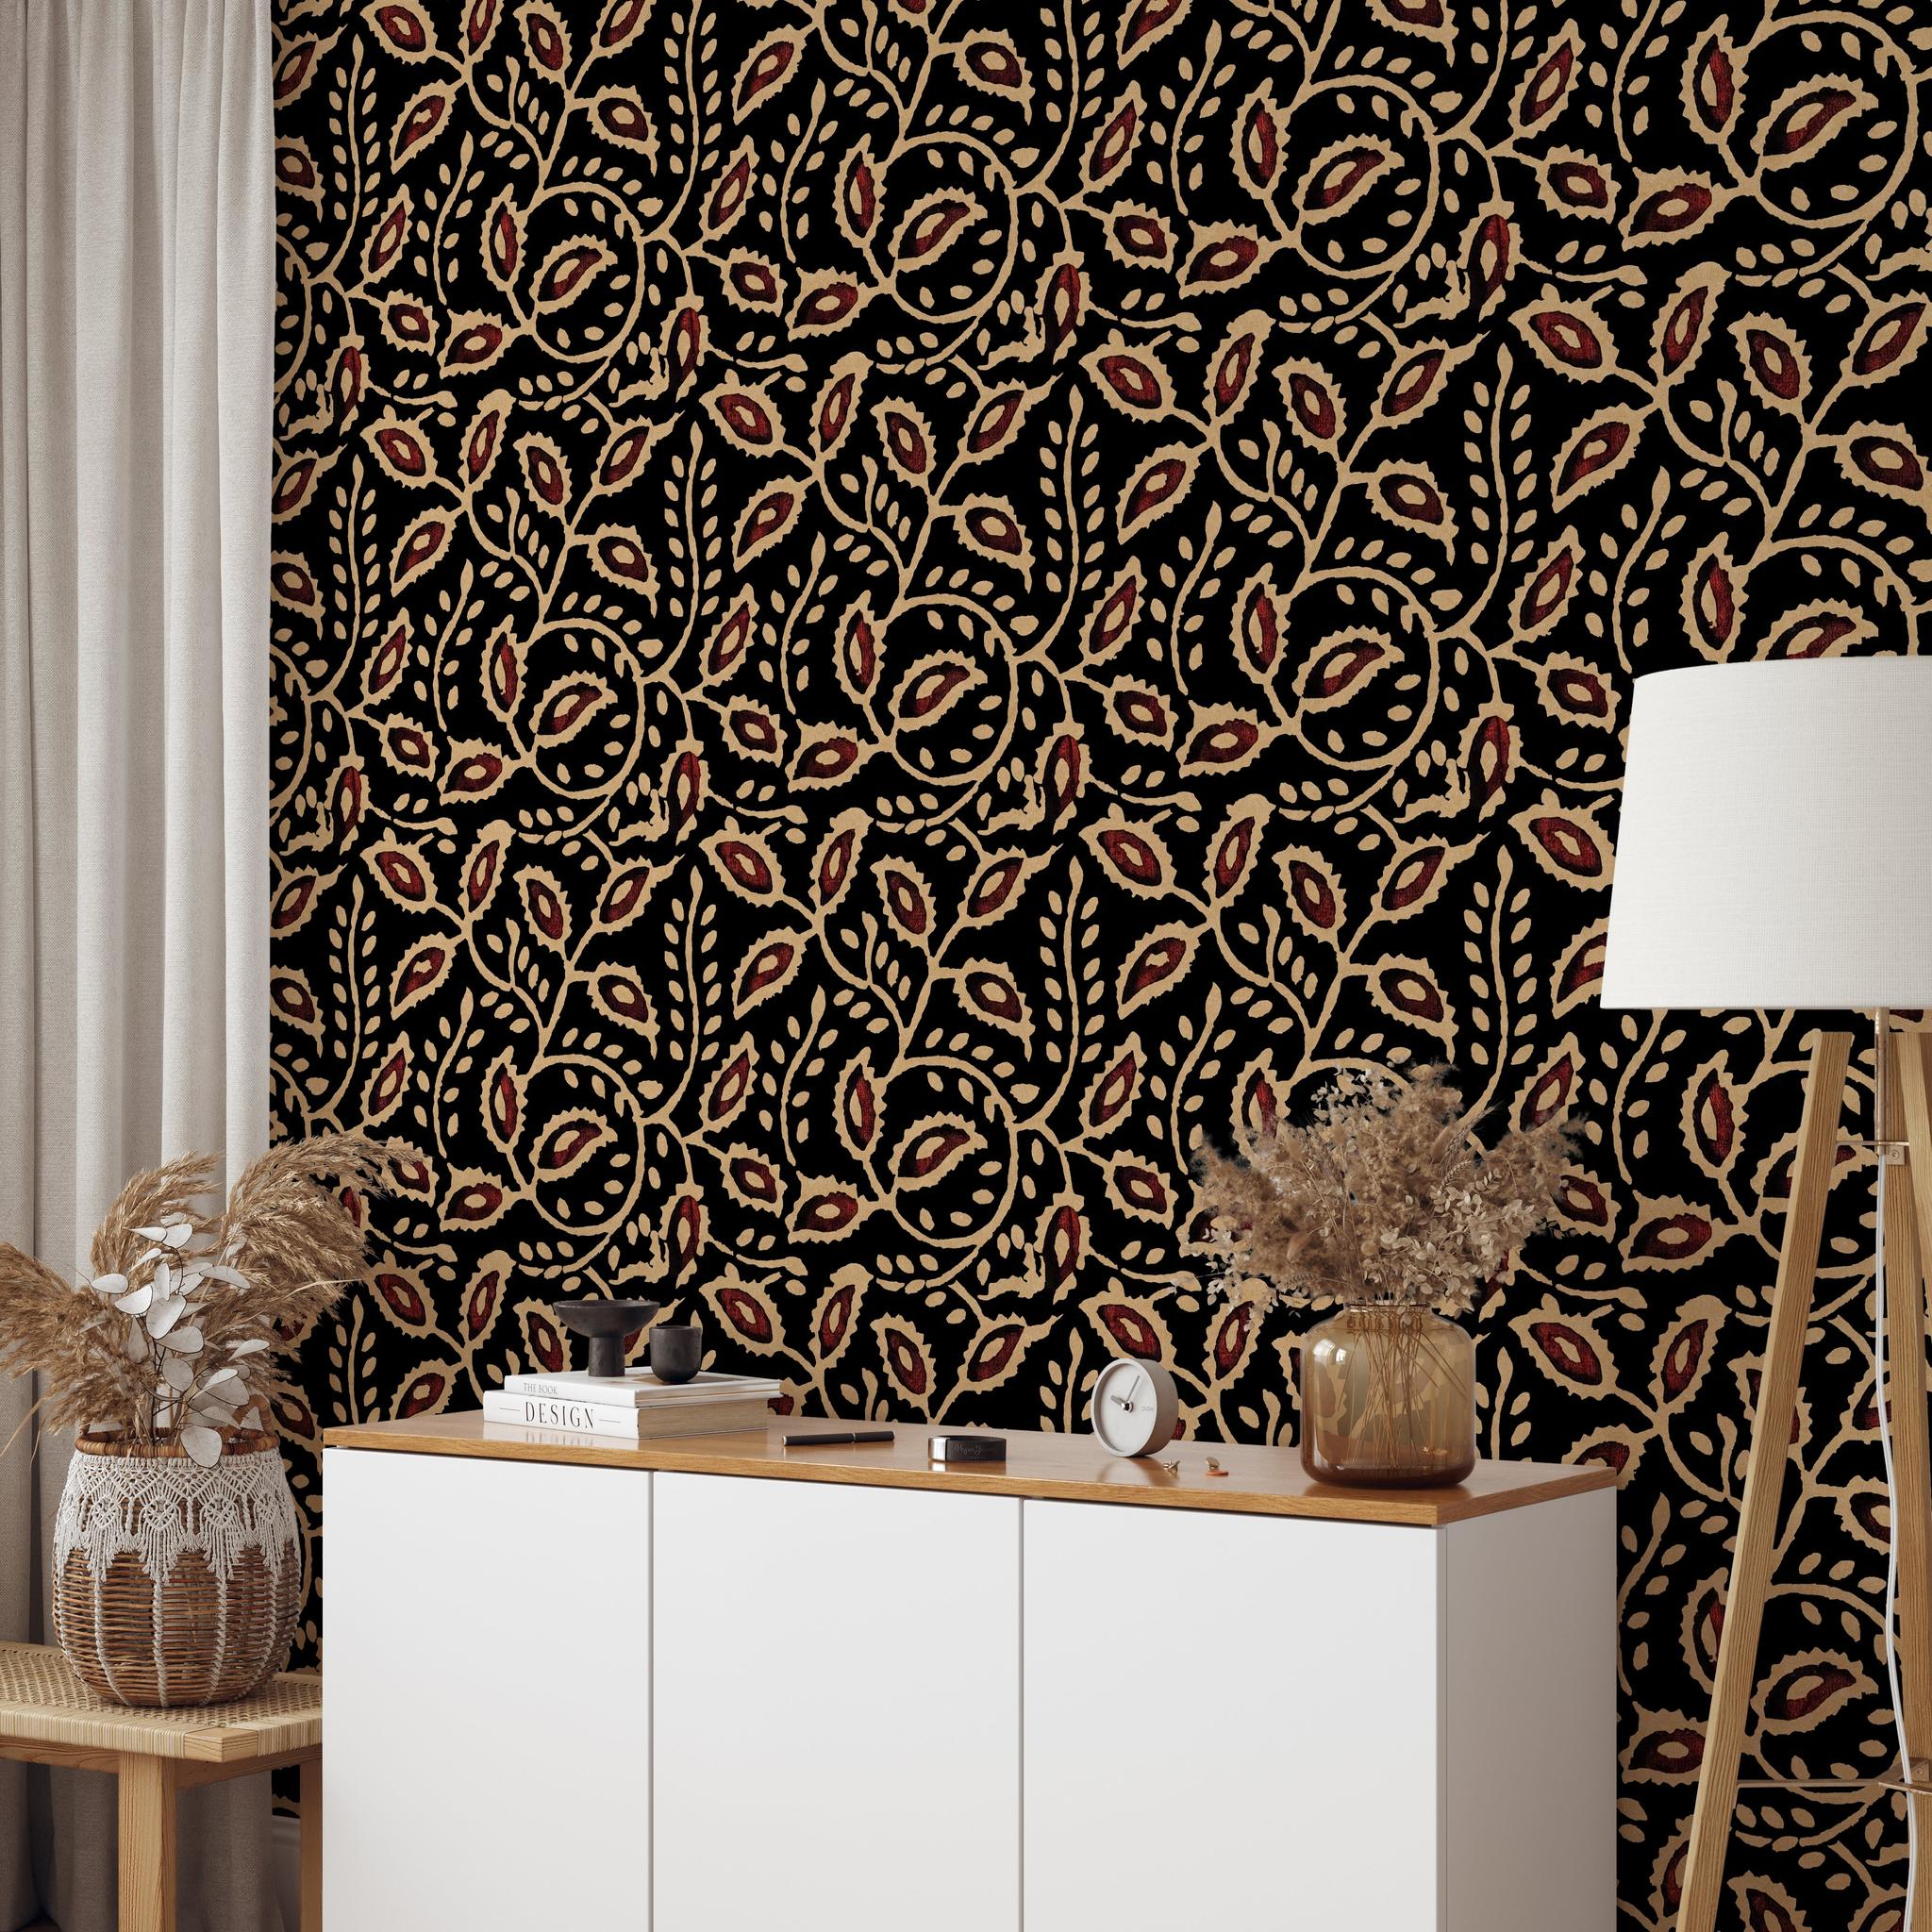 "Wall Blush 'Heart of Mine Wallpaper' in a stylish living room, with elegant decor emphasizing the wallpaper pattern."